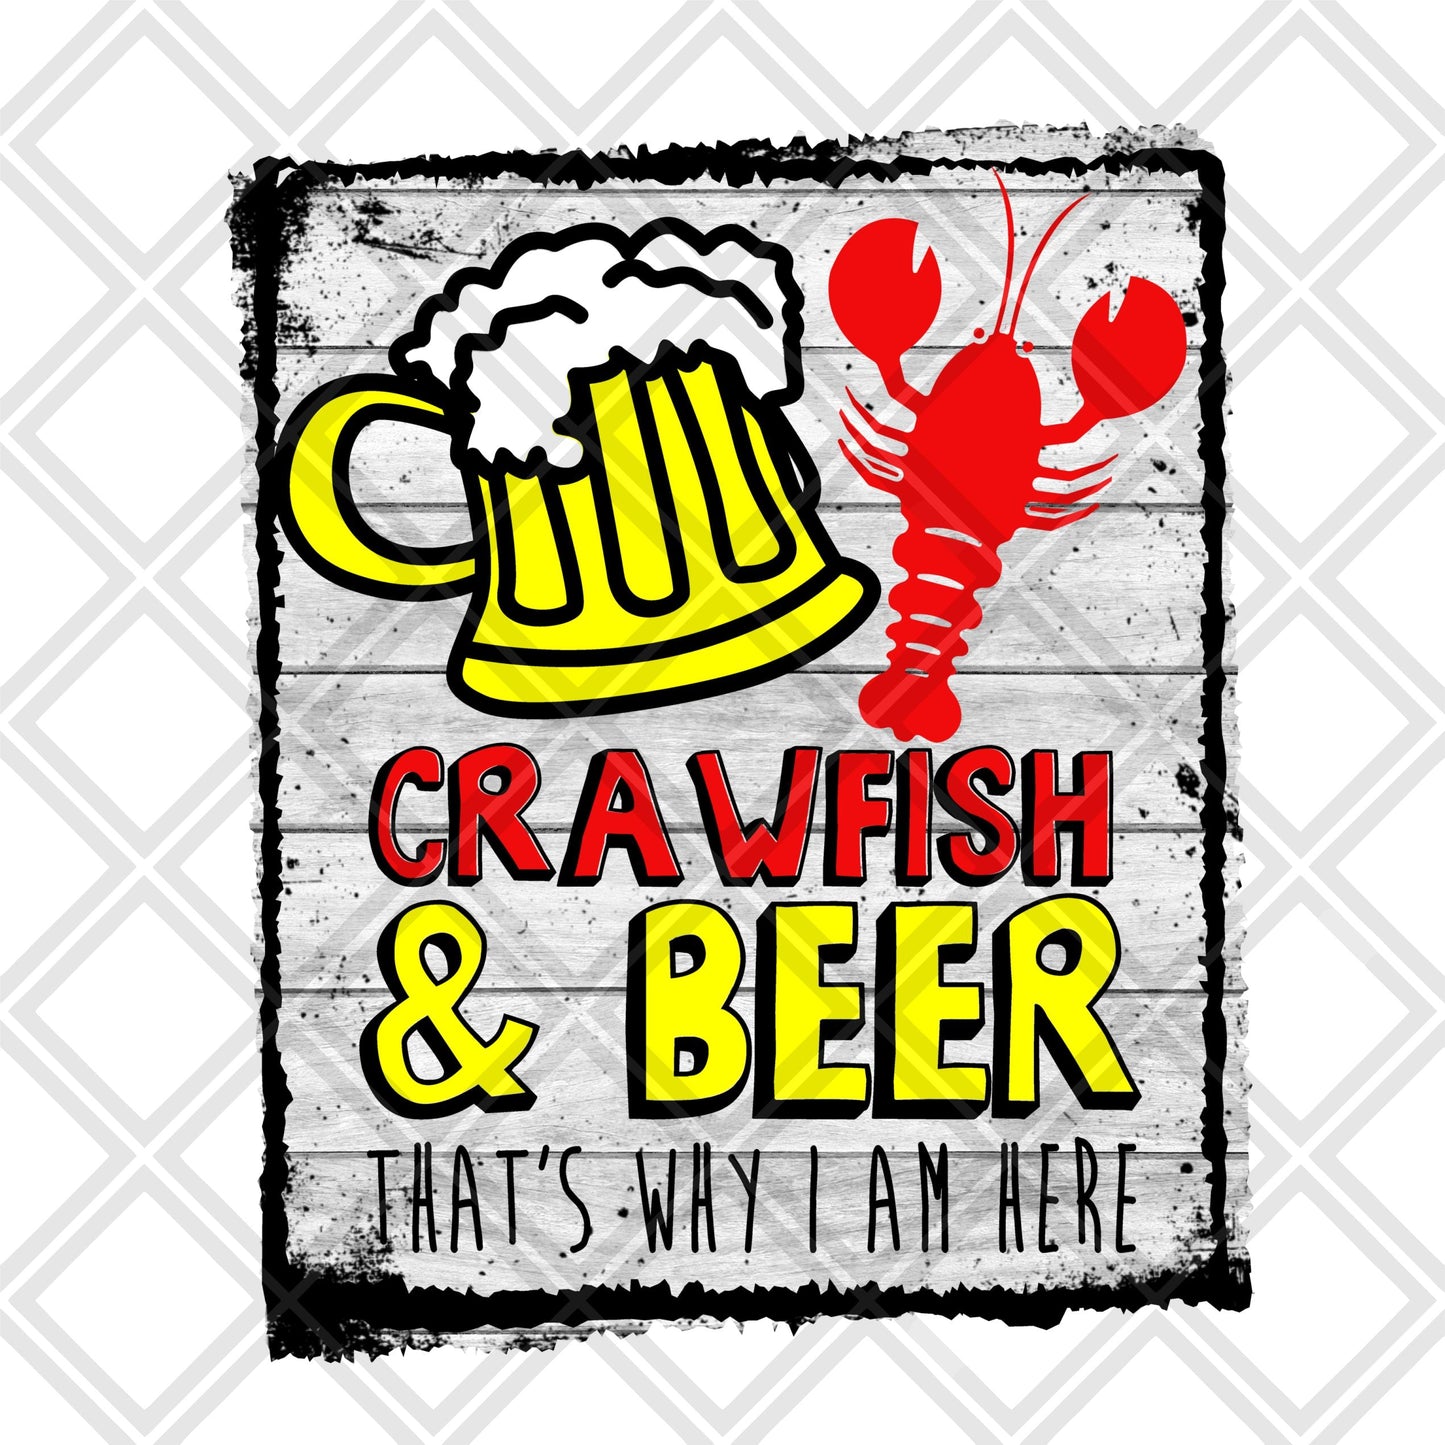 Crawfish and beer that's why i am here DTF TRANSFERPRINT TO ORDER